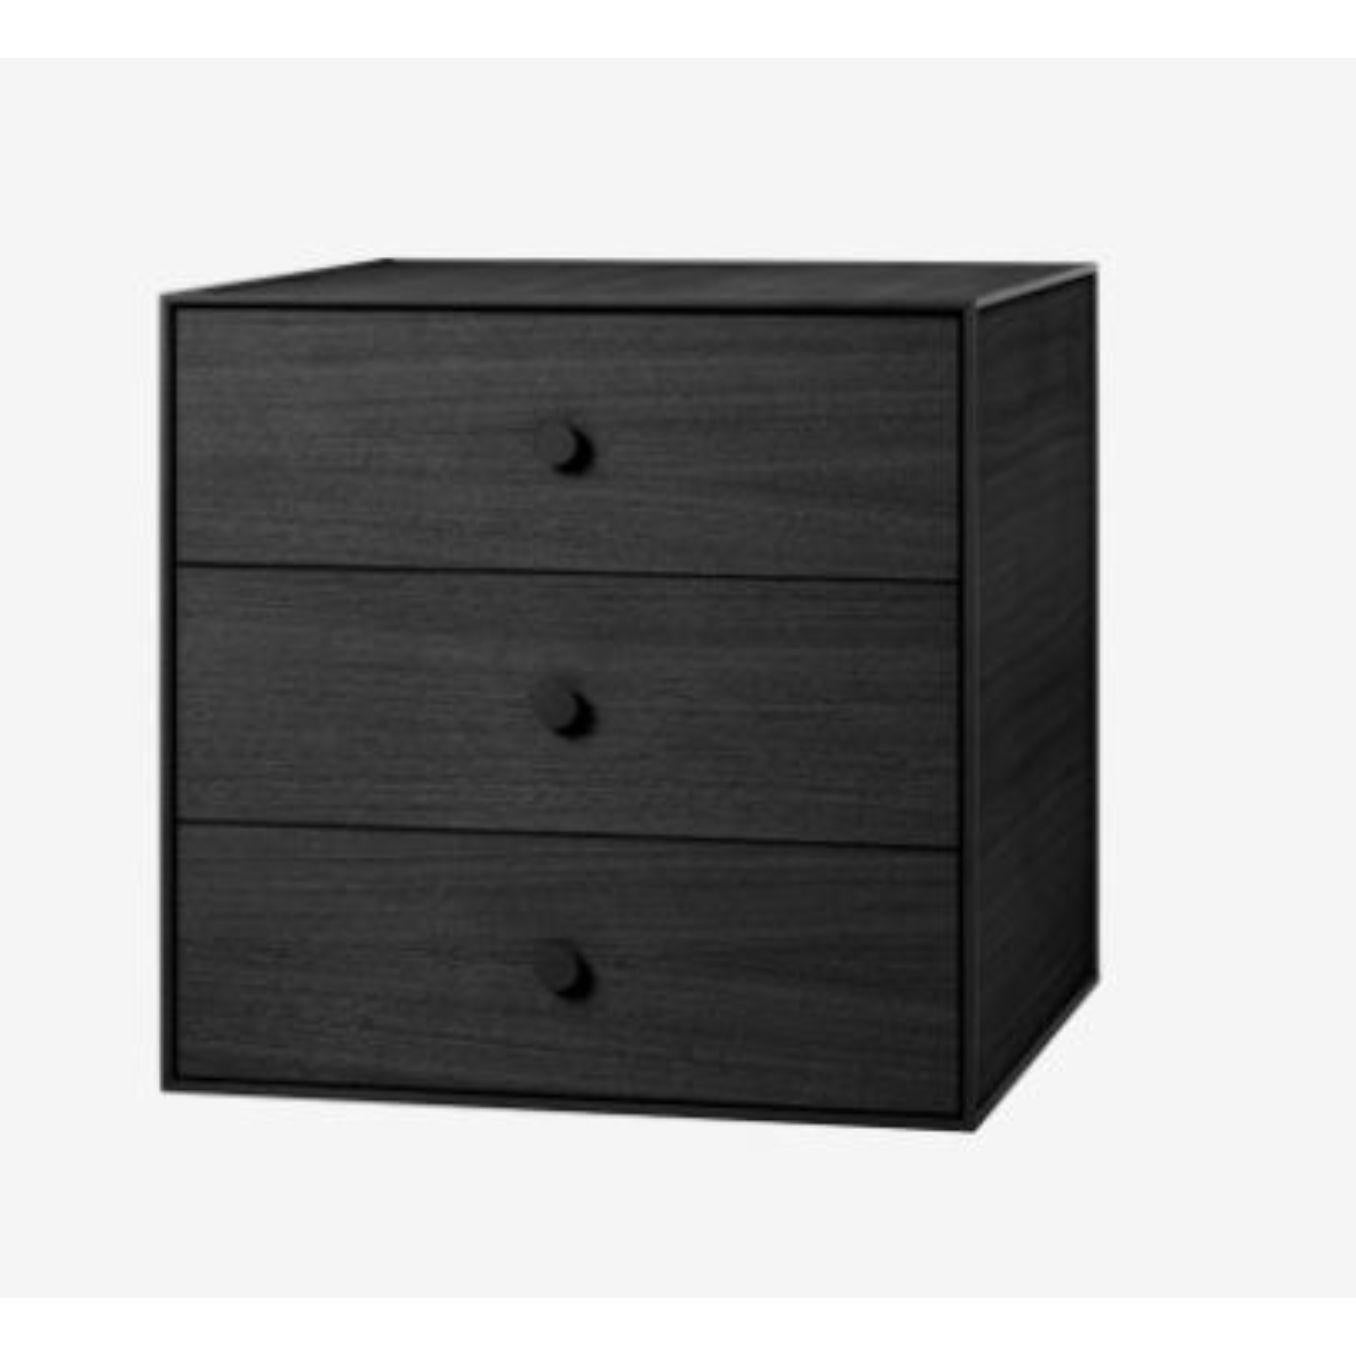 49 Black ash frame box with 3 drawers by Lassen
Dimensions: D 49 x W 42 x H 49 cm 
Materials: finér, melamin, melamin, melamine, metal, veneer, ash
Also available in different colors and dimensions. 
Weight: 24 Kg


By Lassen is a Danish